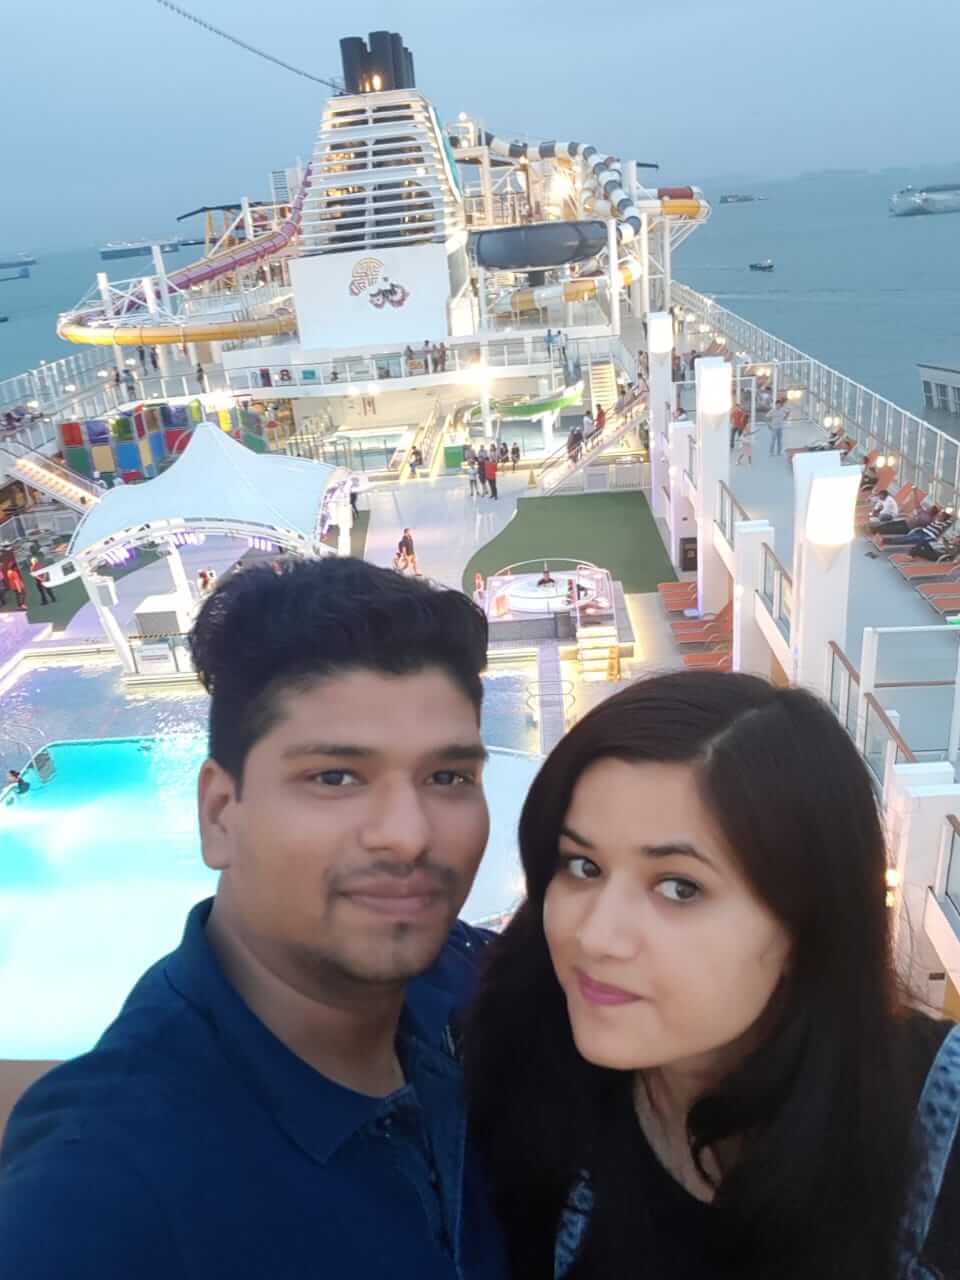 on the cruise